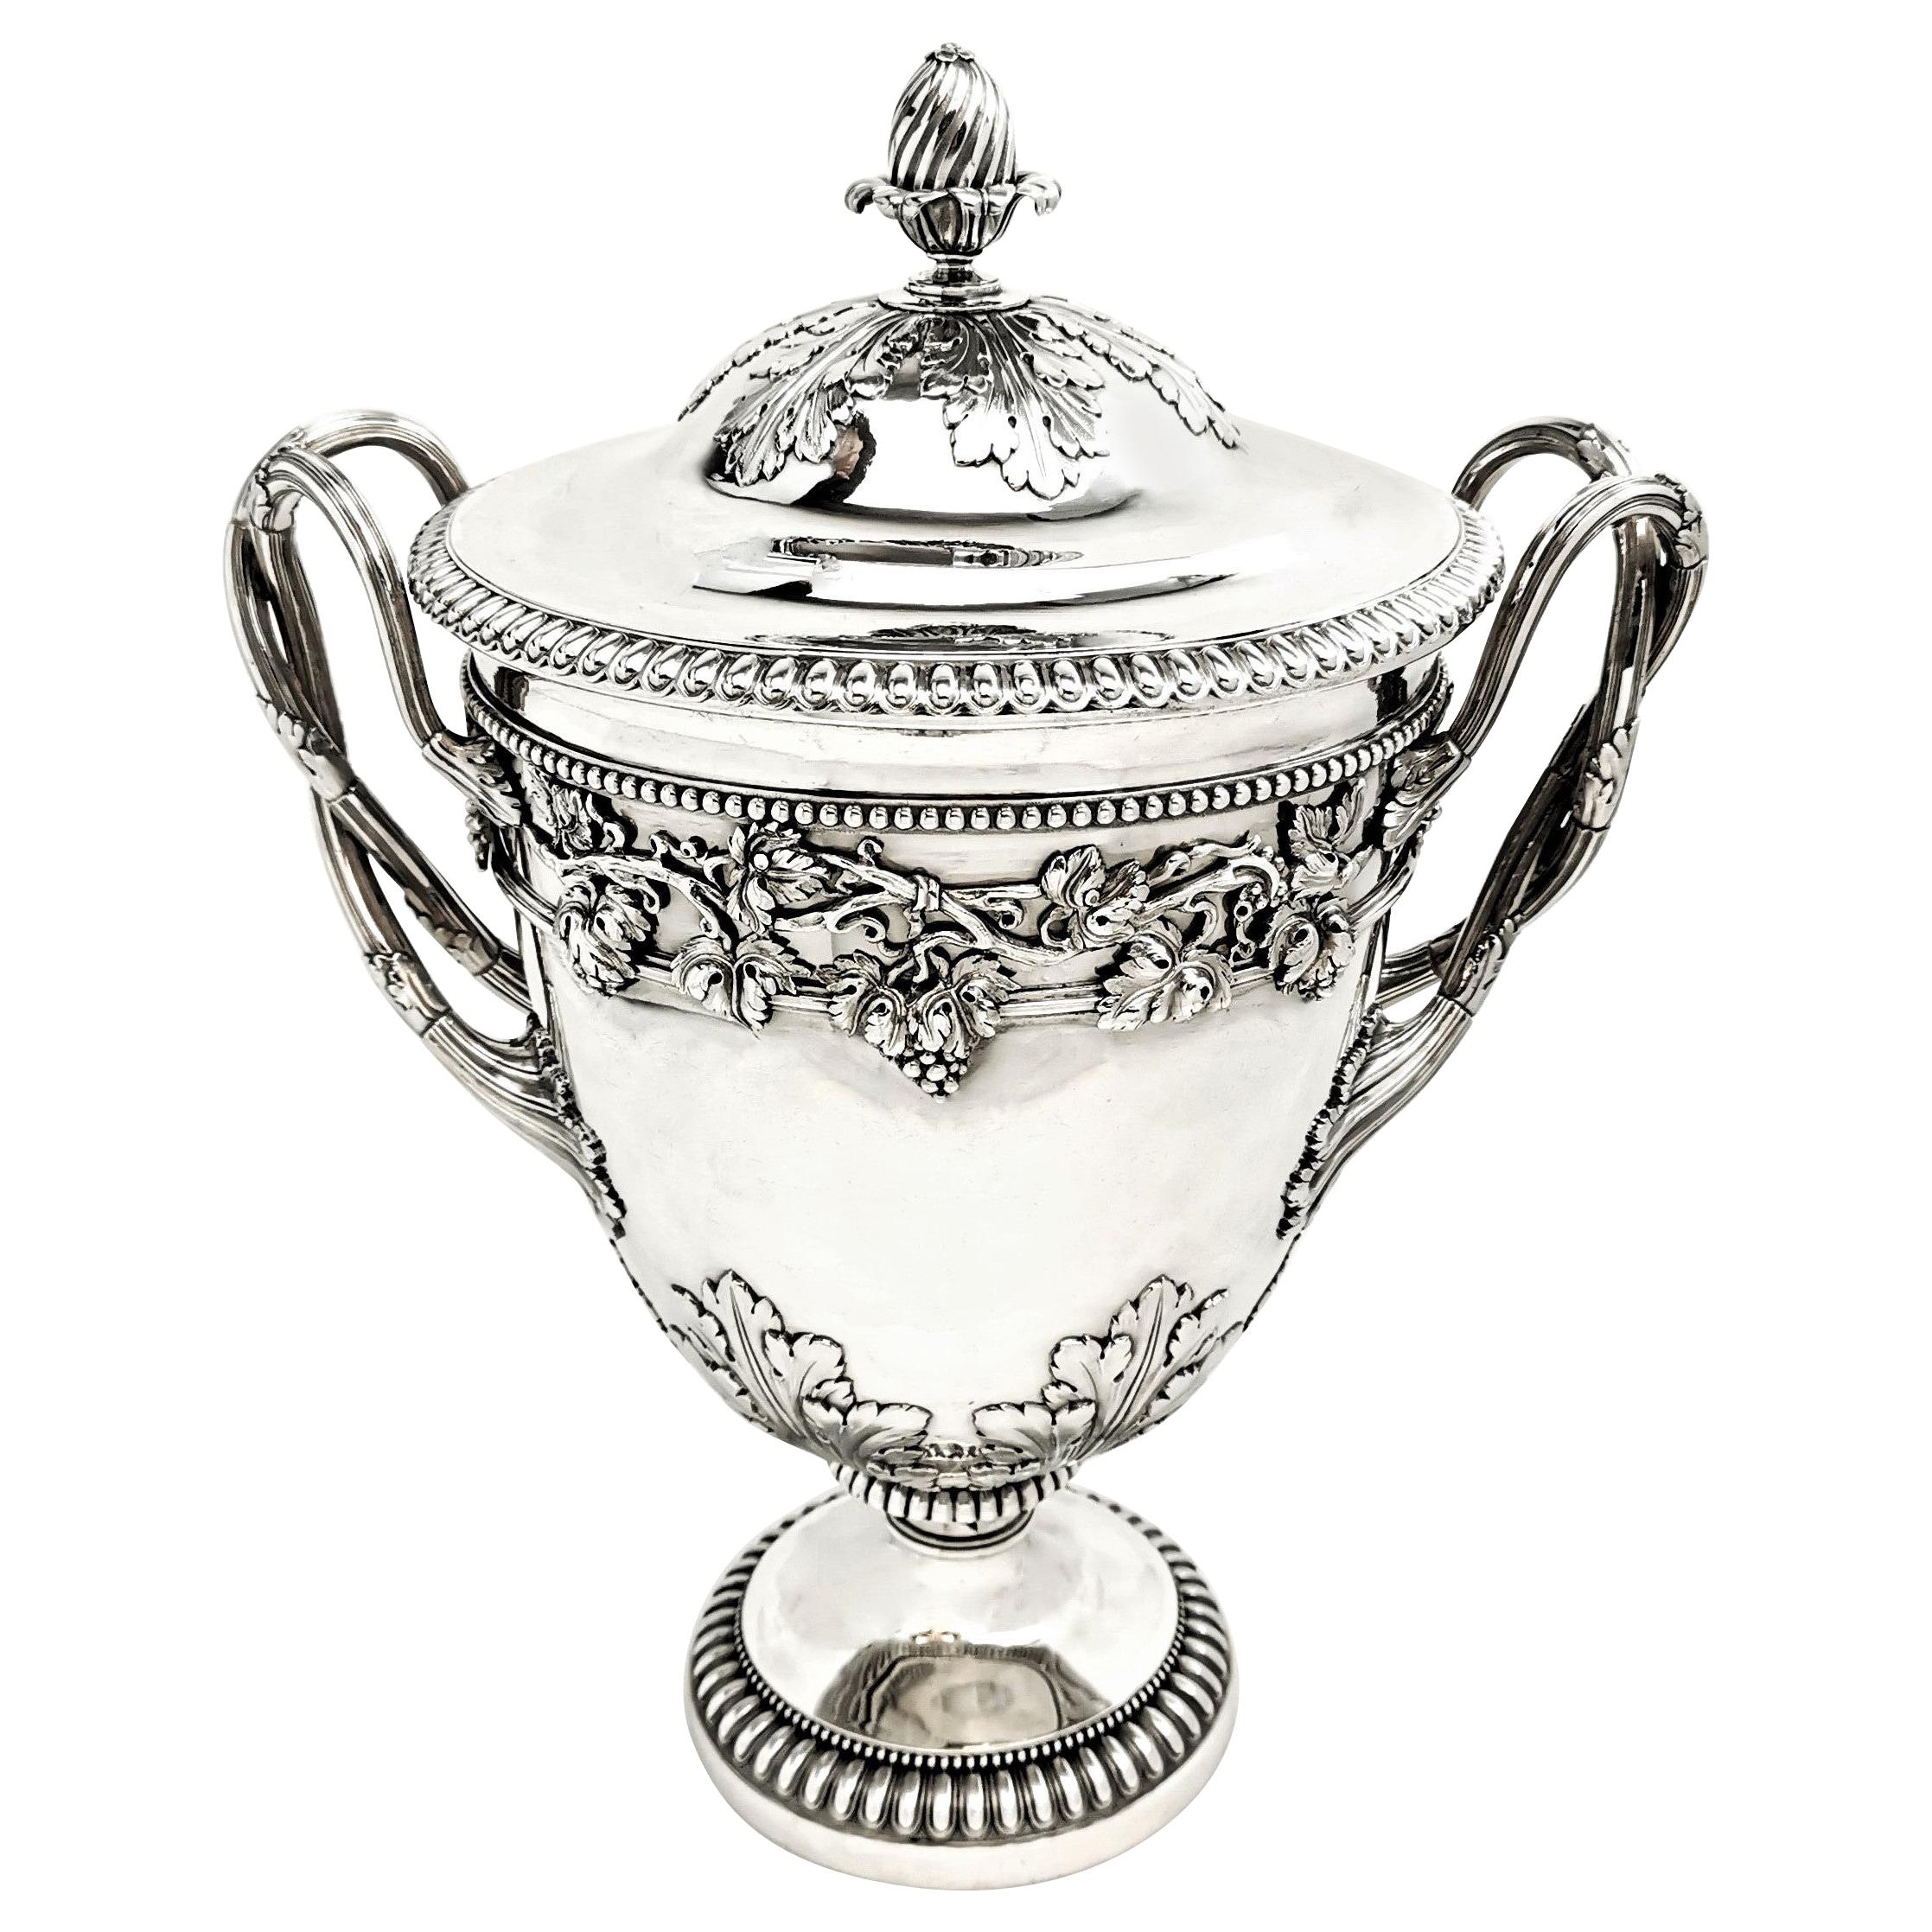 Antique Georgian Sterling Silver Cup & Cover / Lidded Trophy 1812